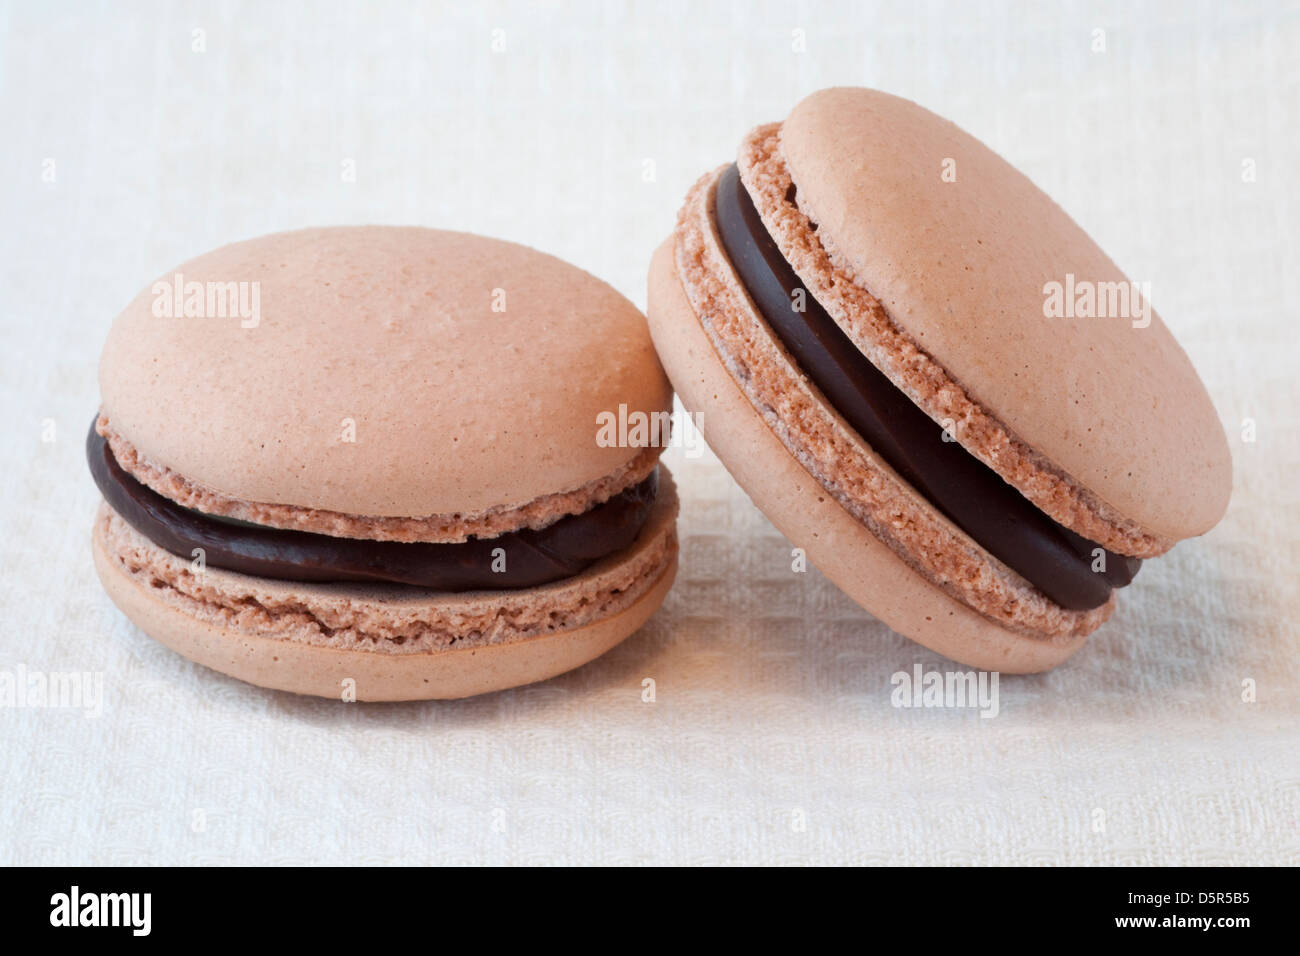 Peanut butter and chocolate flavoured macarons Stock Photo